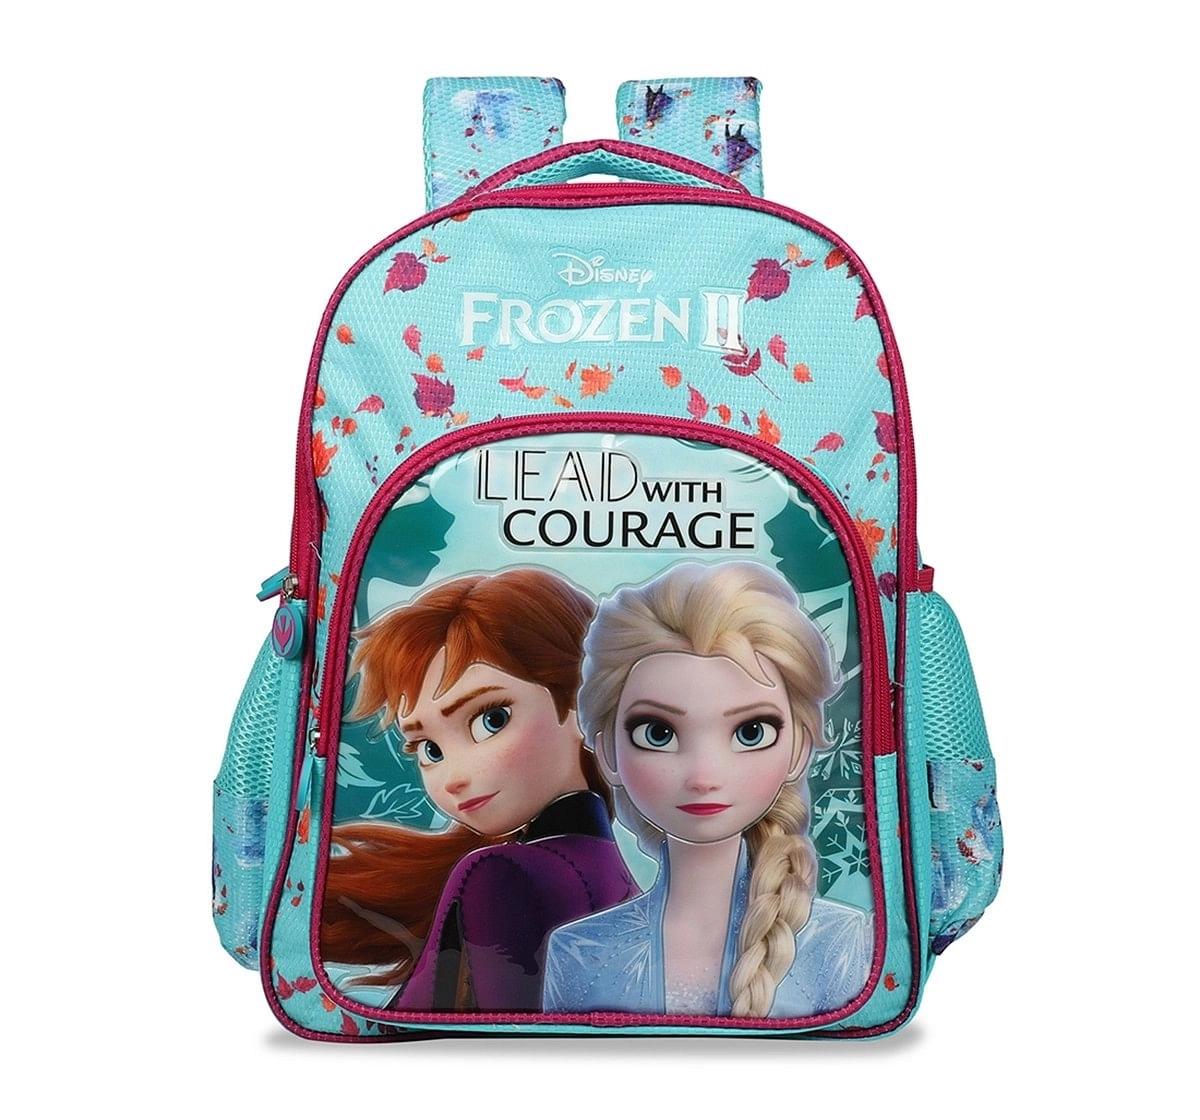 Disney Frozen2 Lead With Courage School Bag 36 Cm Bags for age 3Y+ (Turquoise)